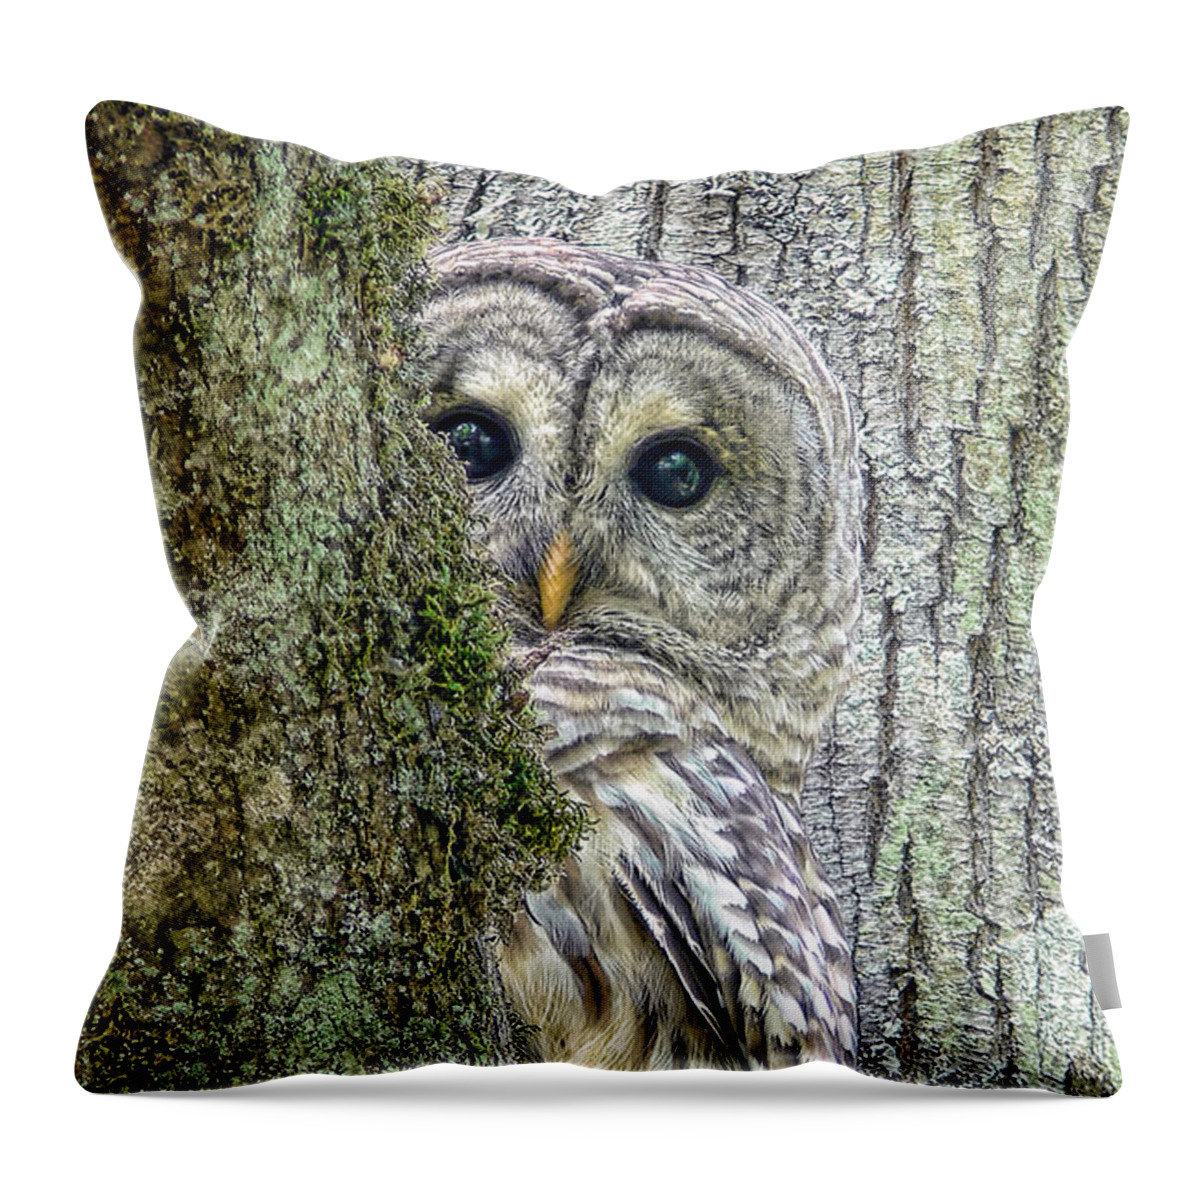 Owl Throw Pillow featuring the photograph Barred Owl Peek a Boo by Jennie Marie Schell